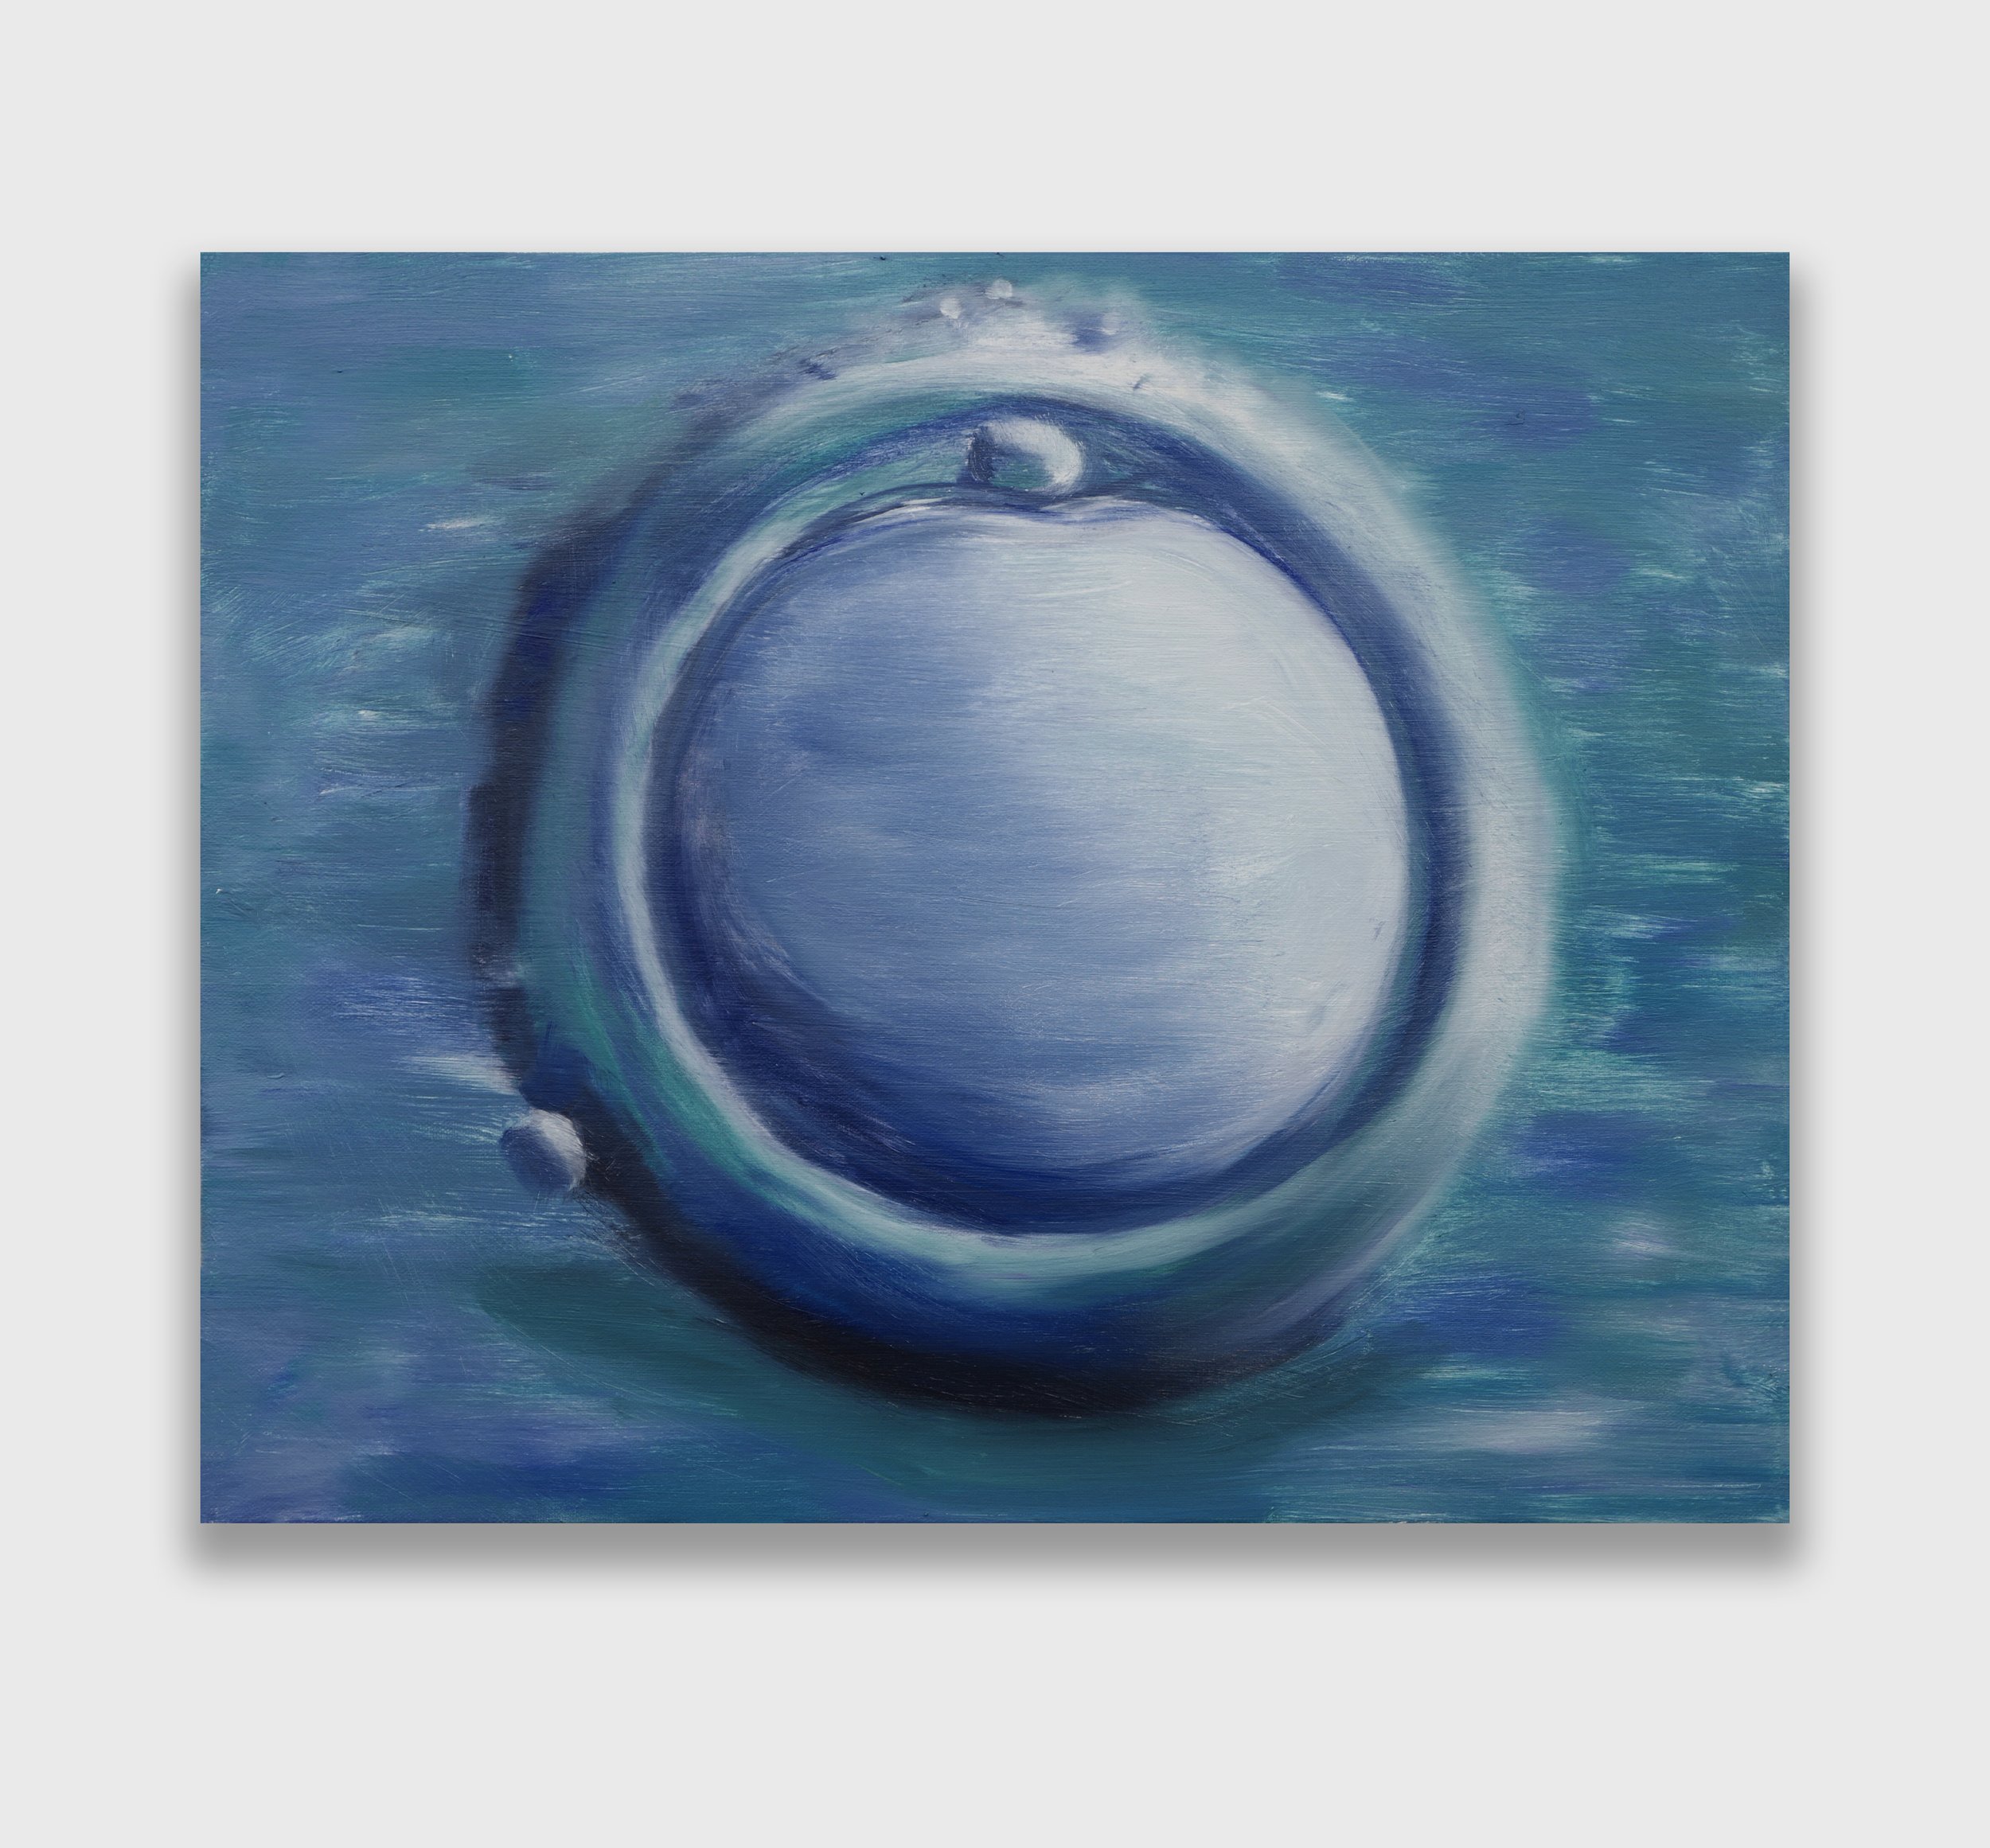   Zygote,  2021  Oil on linen  16 x 20 inches / 40.6 x 50.8 cm 